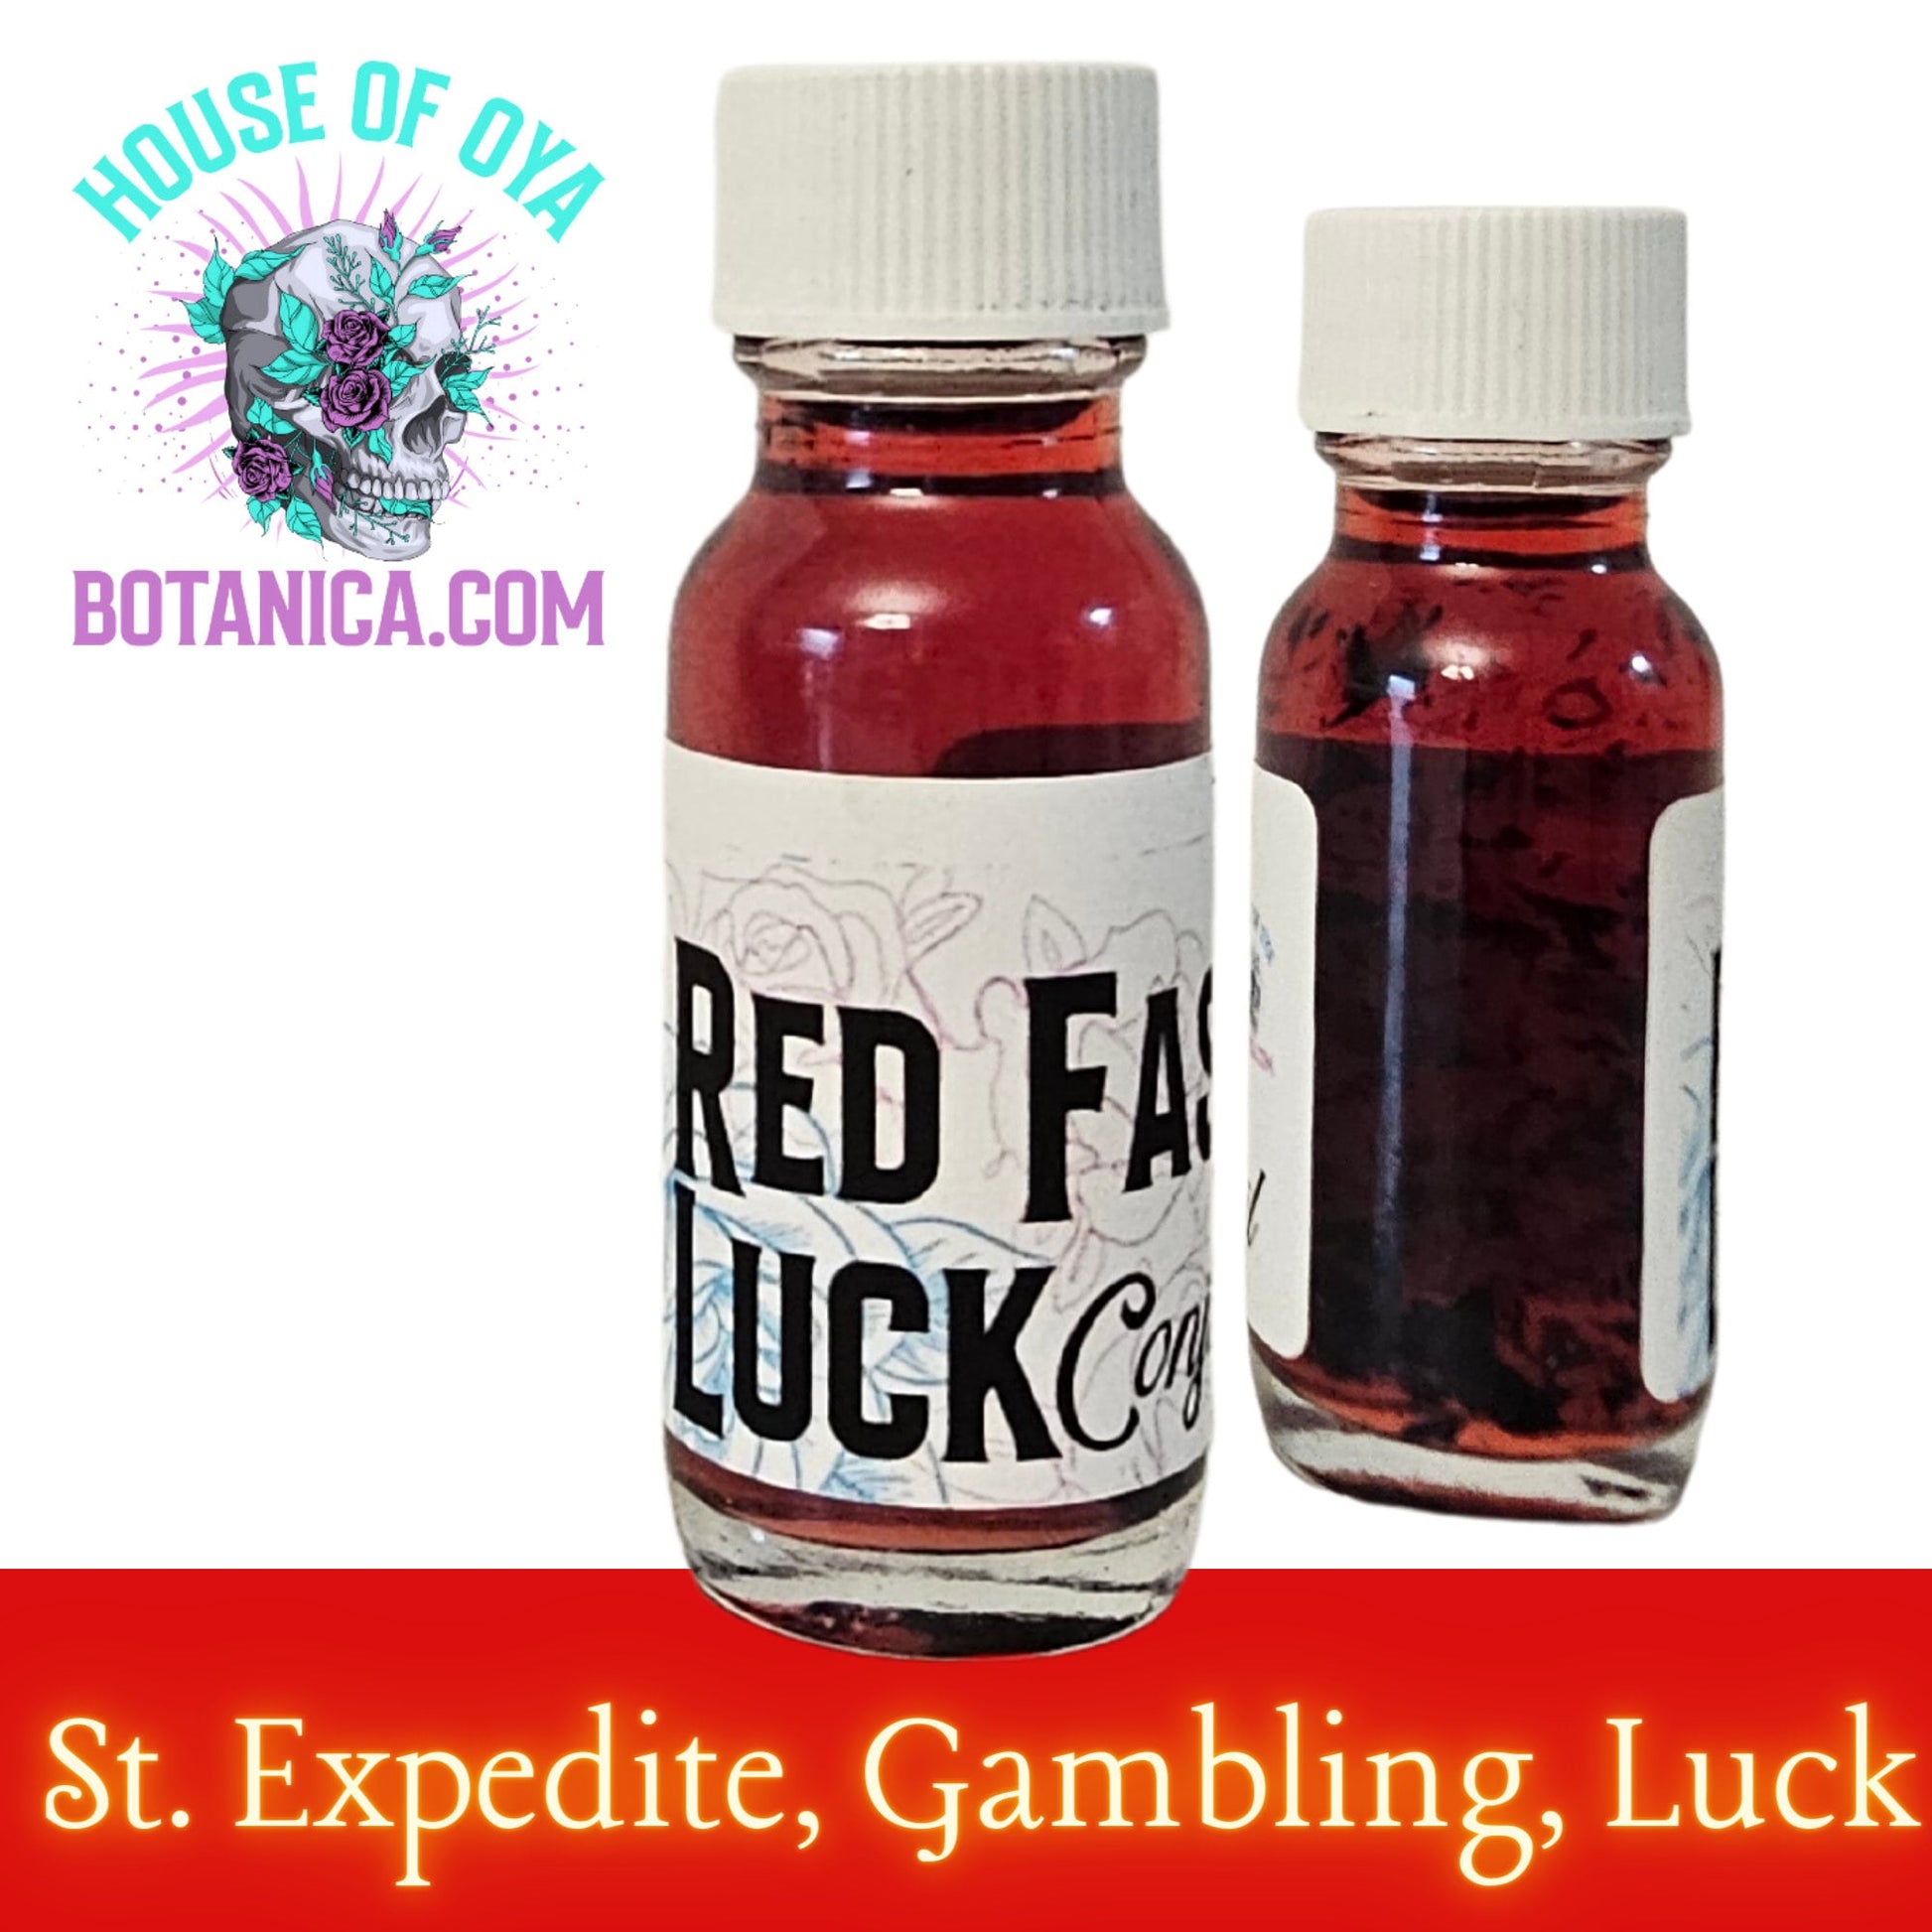 Money oil, Red Fast Luck, Conjure Hoodoo Oils, Gamboling, St. expedite, Witch Spells,